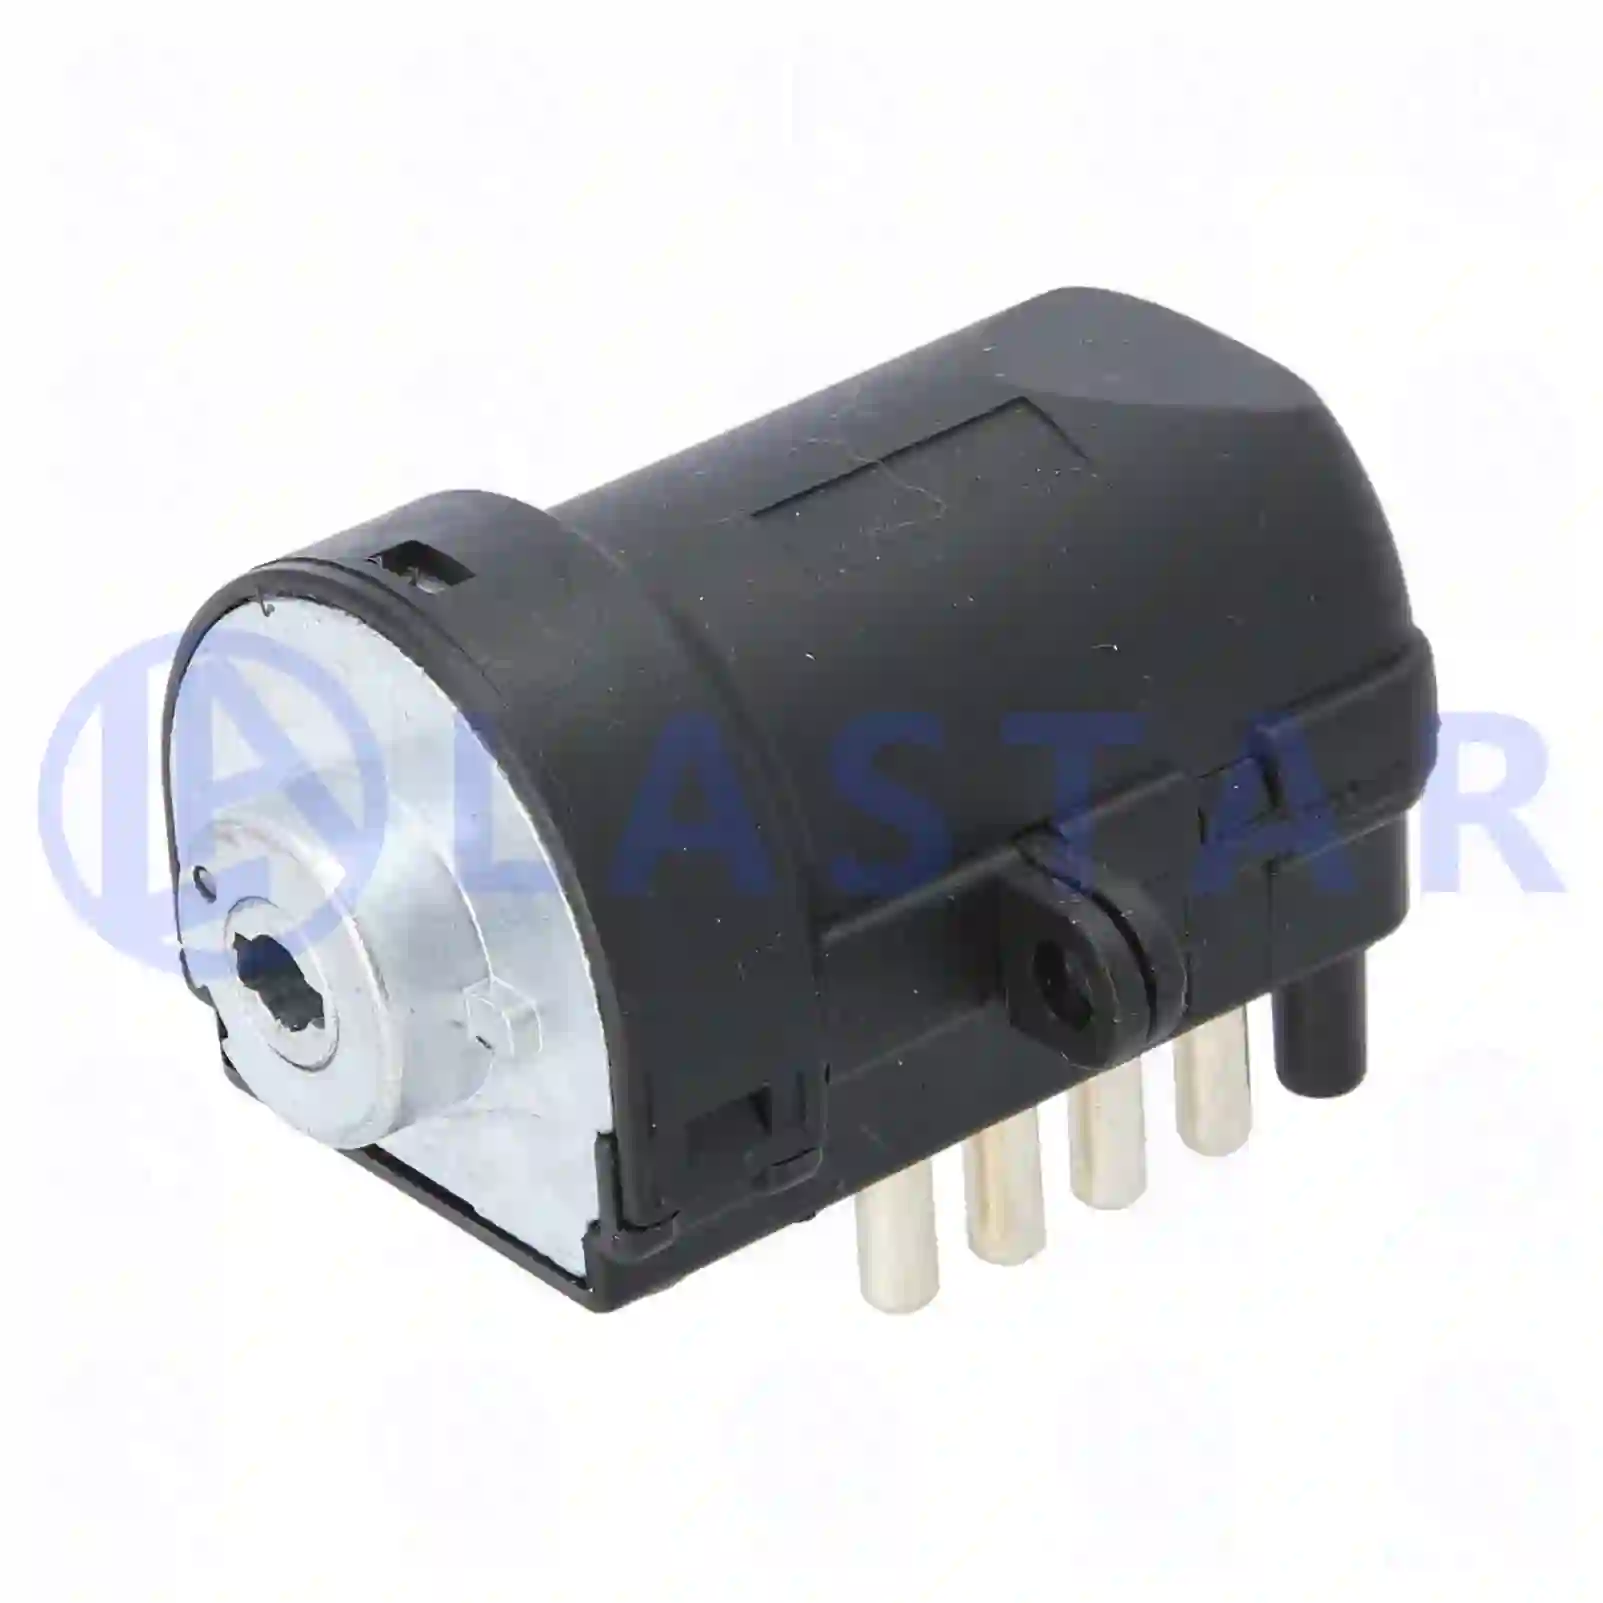 Ignition switch, 77705277, 1084000, 1605352, 8159904, ZG20033-0008 ||  77705277 Lastar Spare Part | Truck Spare Parts, Auotomotive Spare Parts Ignition switch, 77705277, 1084000, 1605352, 8159904, ZG20033-0008 ||  77705277 Lastar Spare Part | Truck Spare Parts, Auotomotive Spare Parts